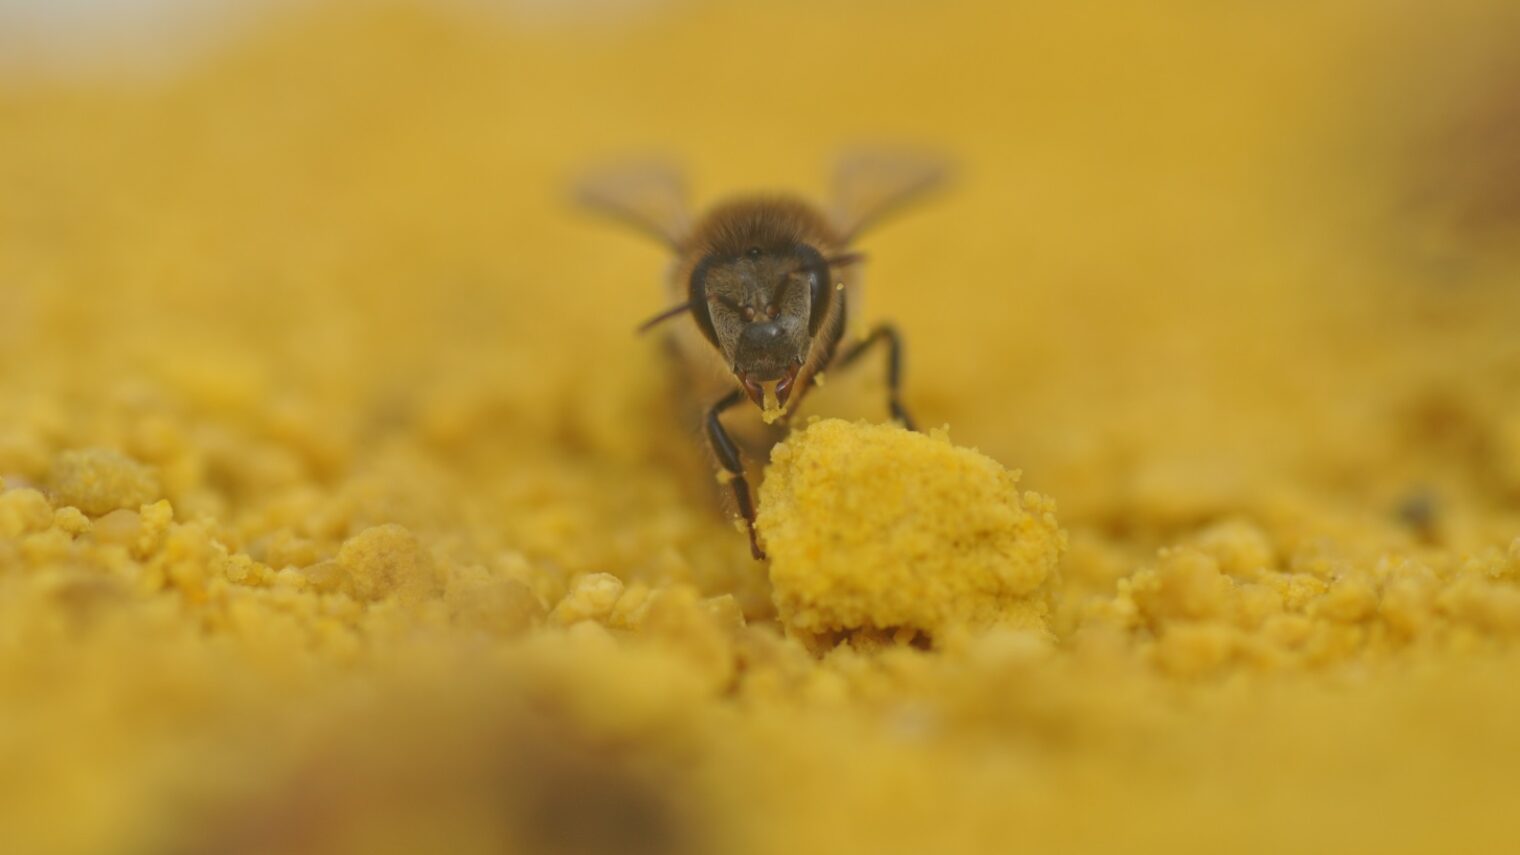 A bee in the Benjamin Triwaks Bee Research Center in Rehovot. Photo by Shlomi Zarchin